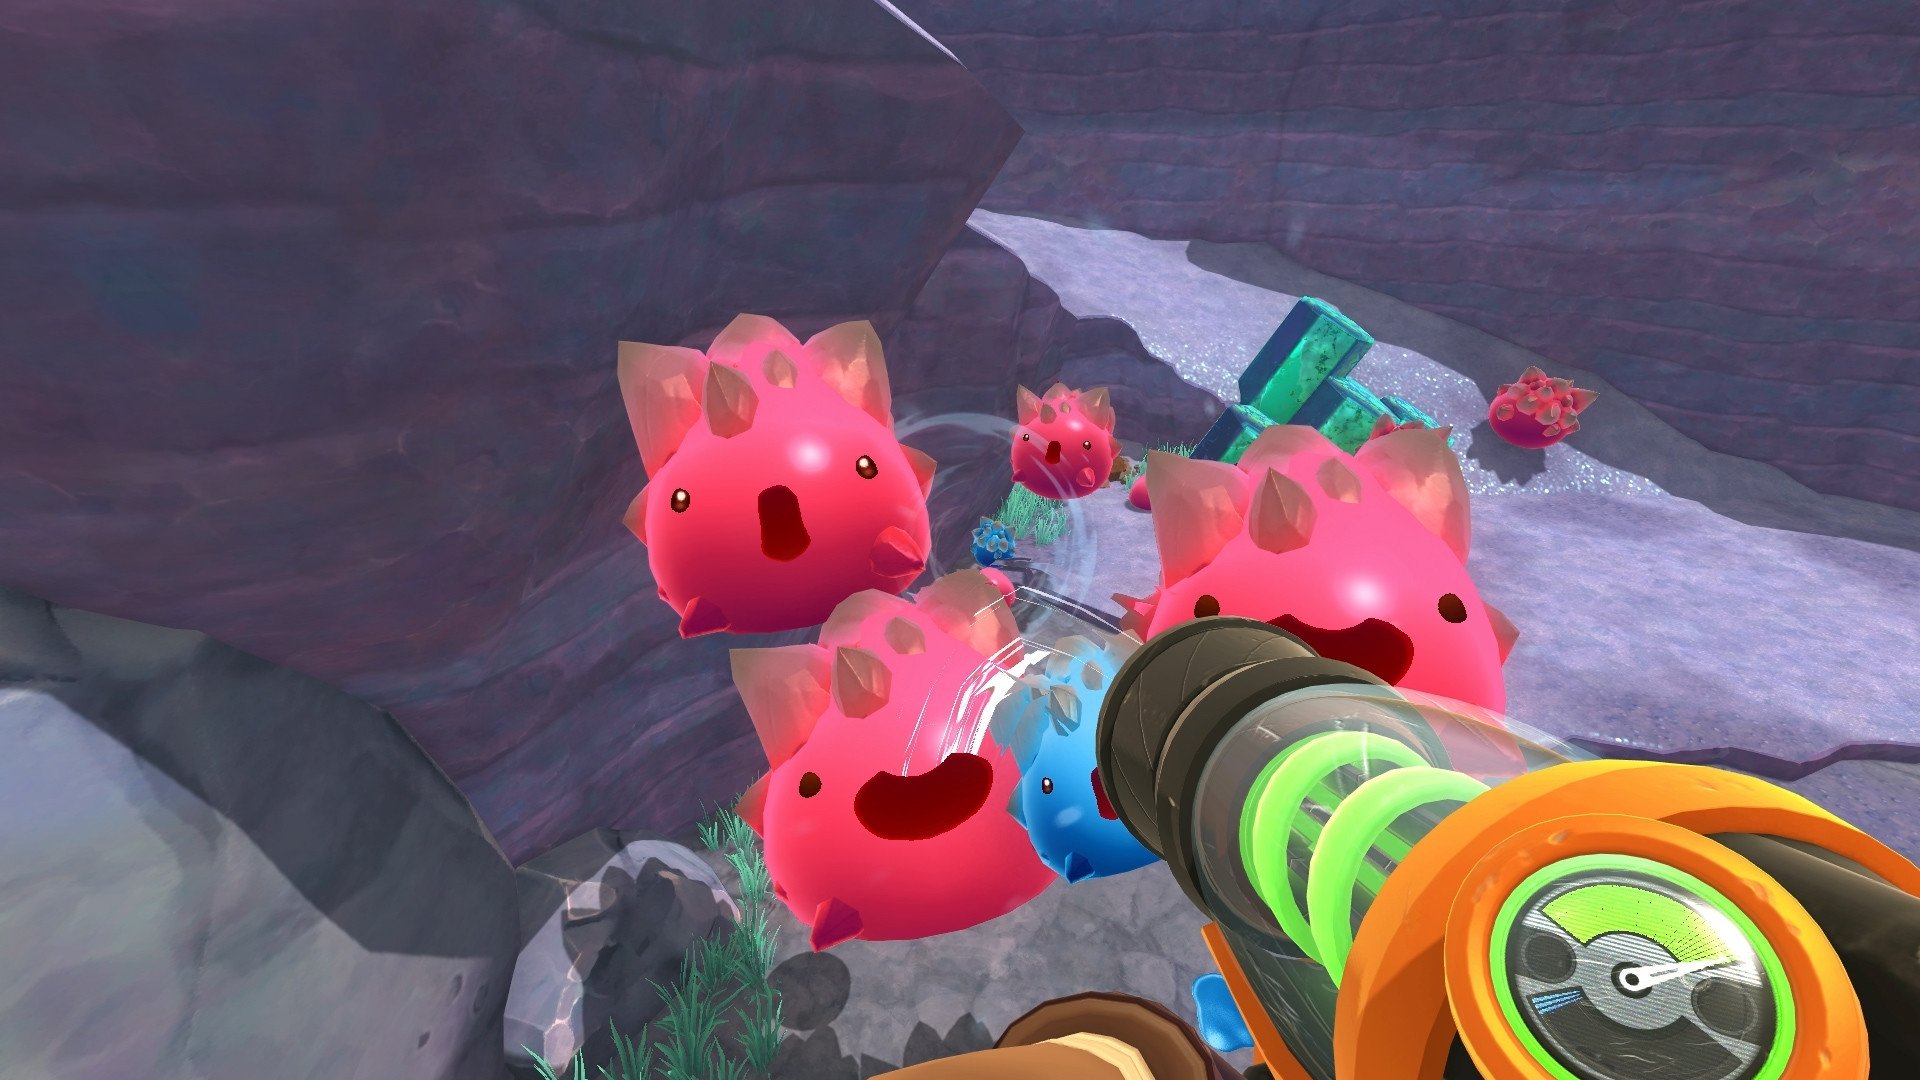 download slime rancher 2 price for free